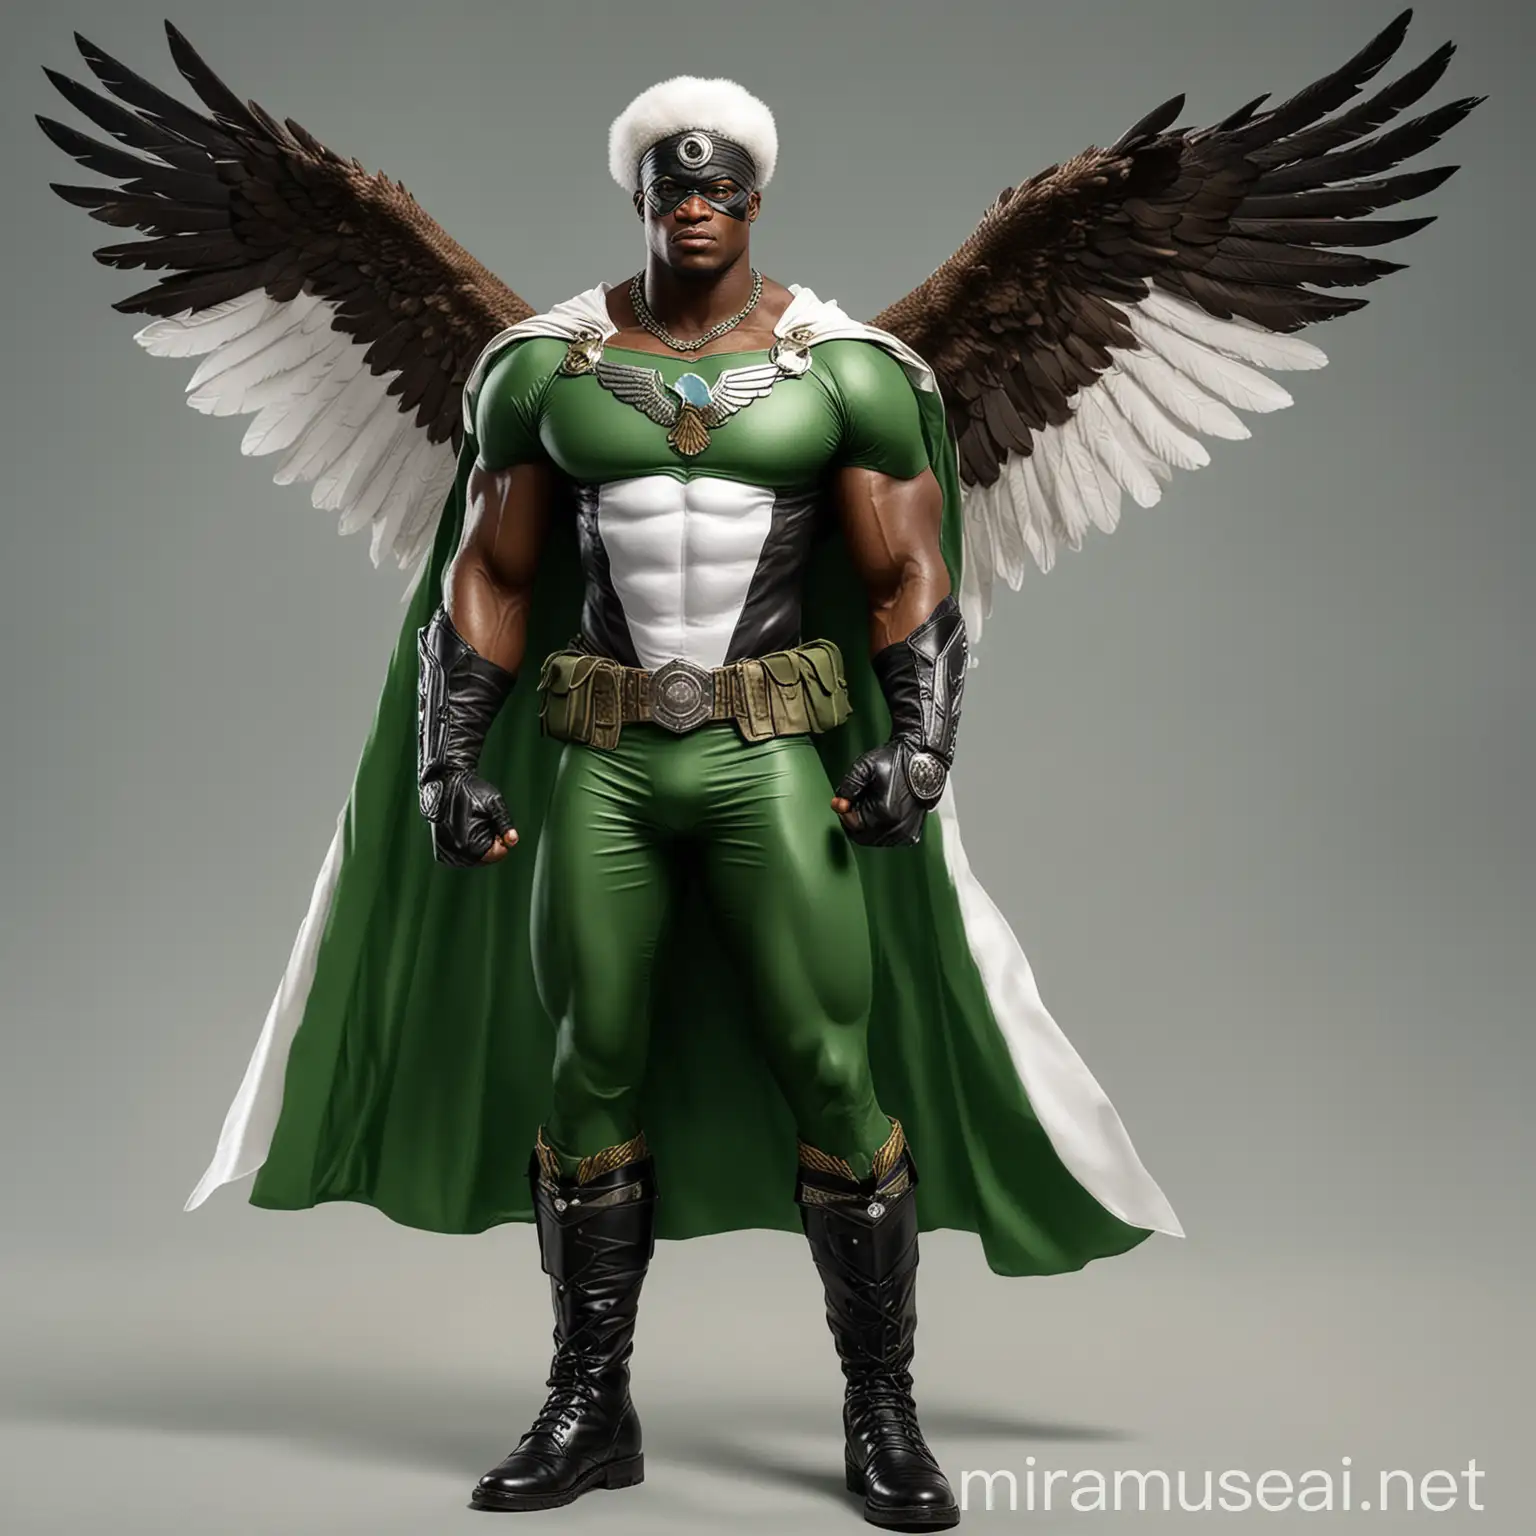 A Nigerian muscular superhero named Captain Eagle, his costume is mostly green with a touch of white, like the Nigerian flag, his suit has an eagle emblem on his chest, he has a black utility belt and a headband with a diamond stone in the middle, his boots are white, and he has a white Cape.